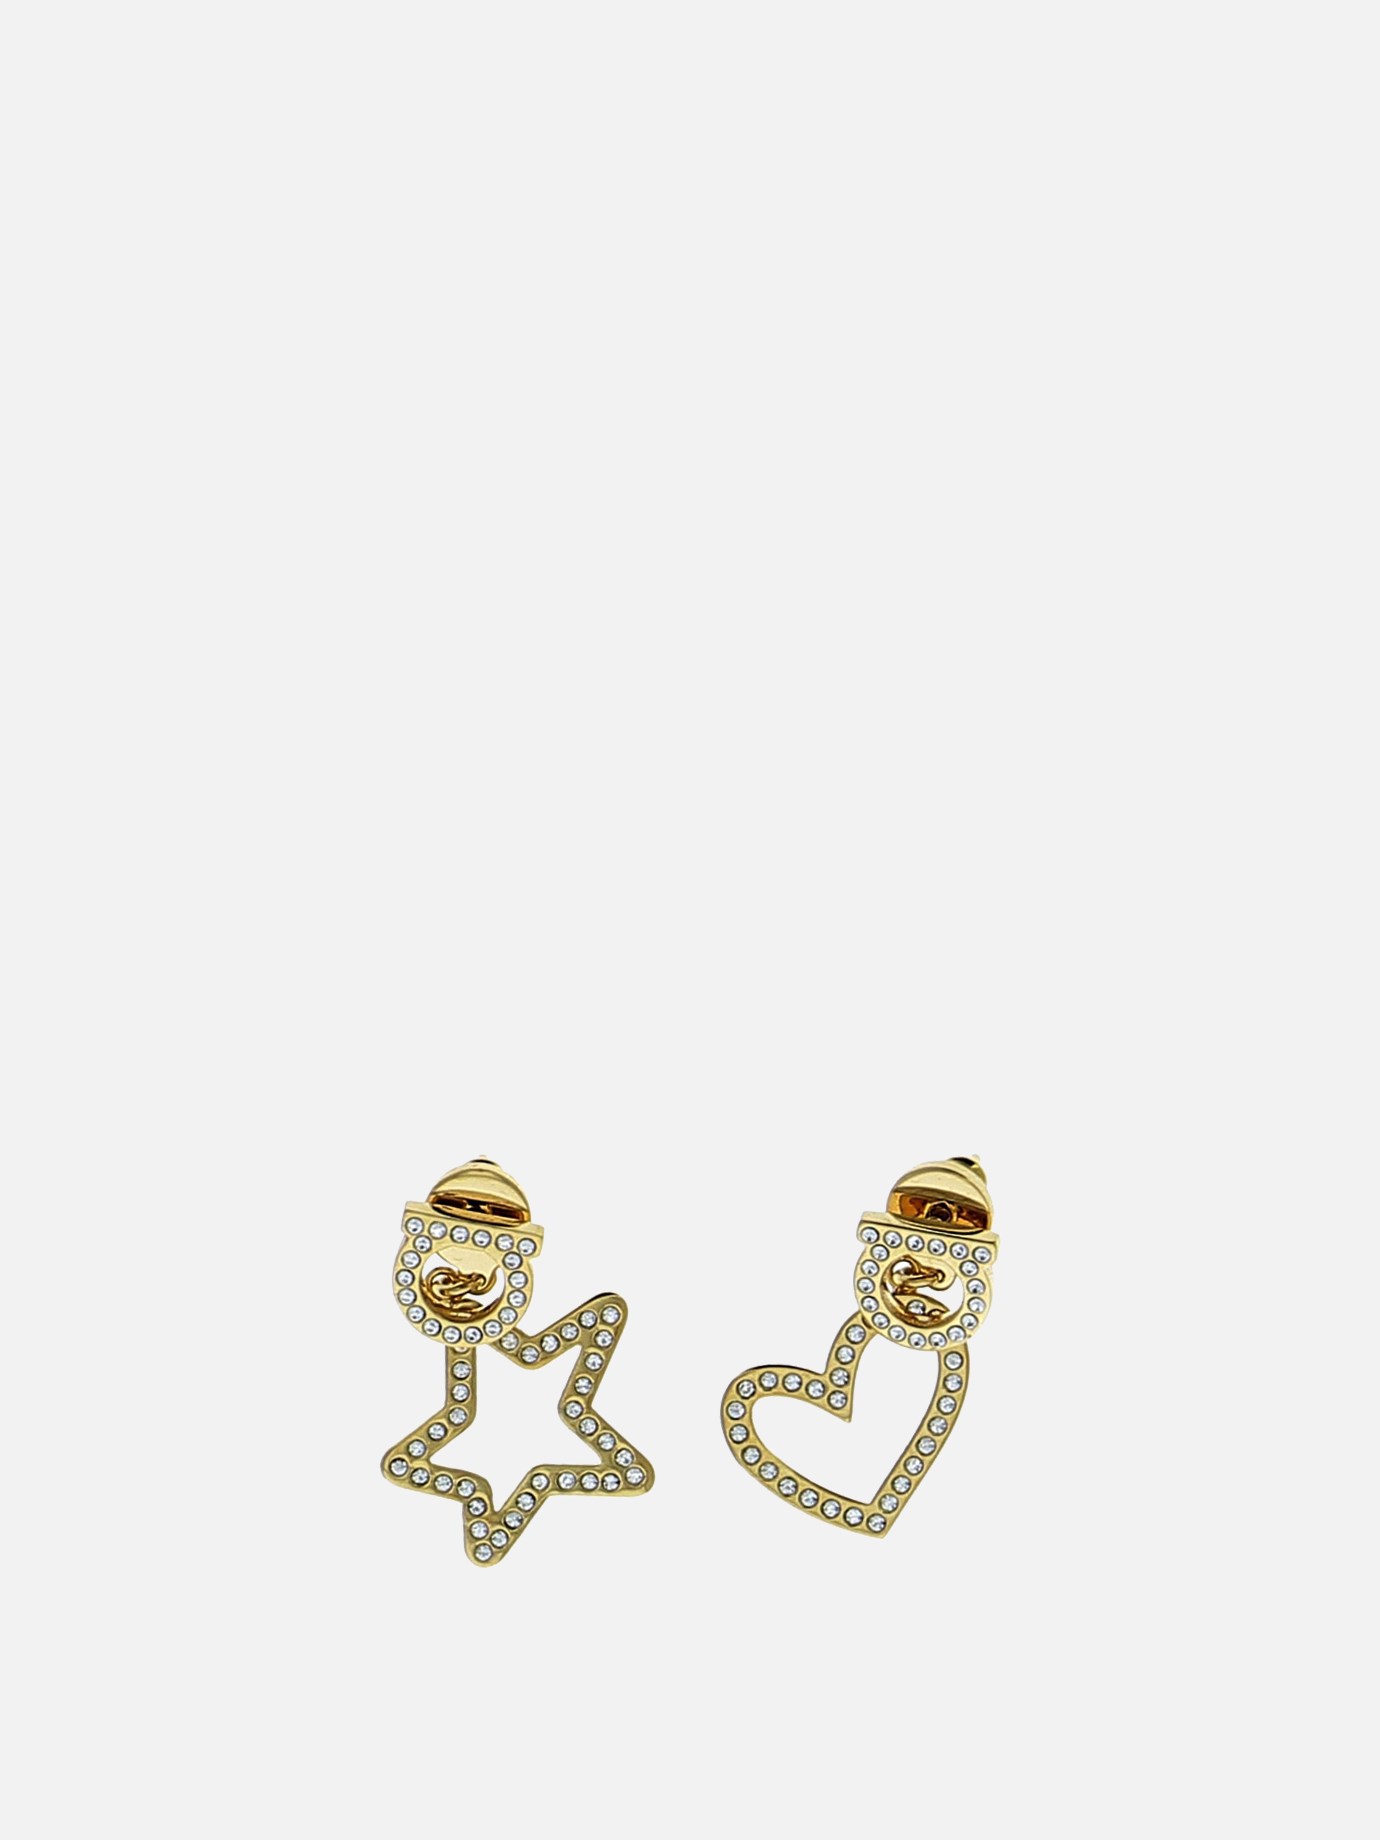 Earrings with crystalsby Salvatore Ferragamo - 0